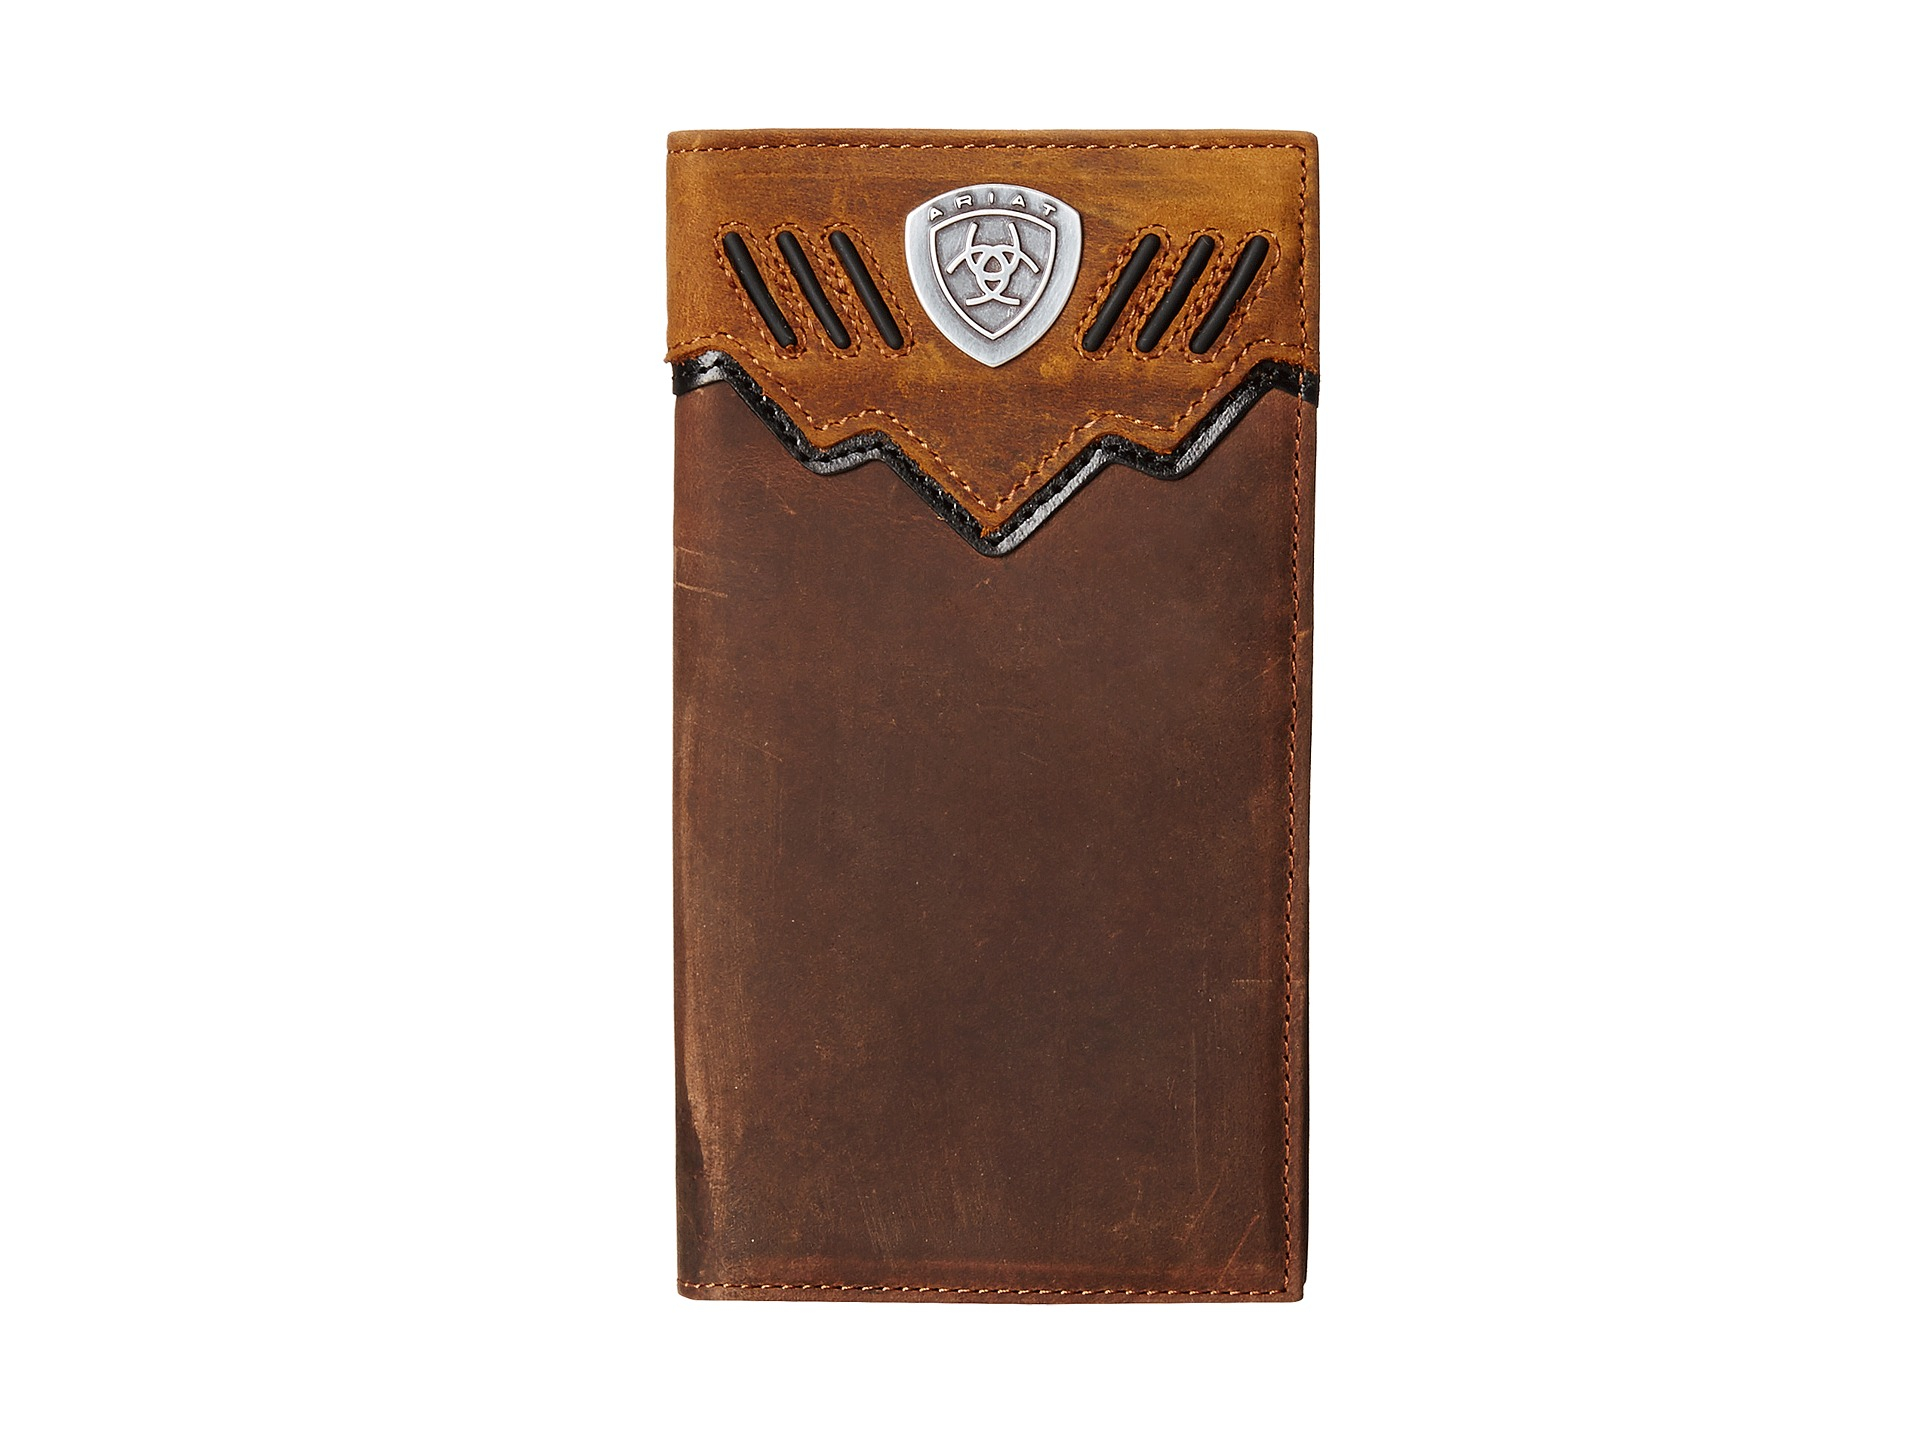 Ariat Leather Shield Concho Rodeo Wallet in Brown for Men - Lyst